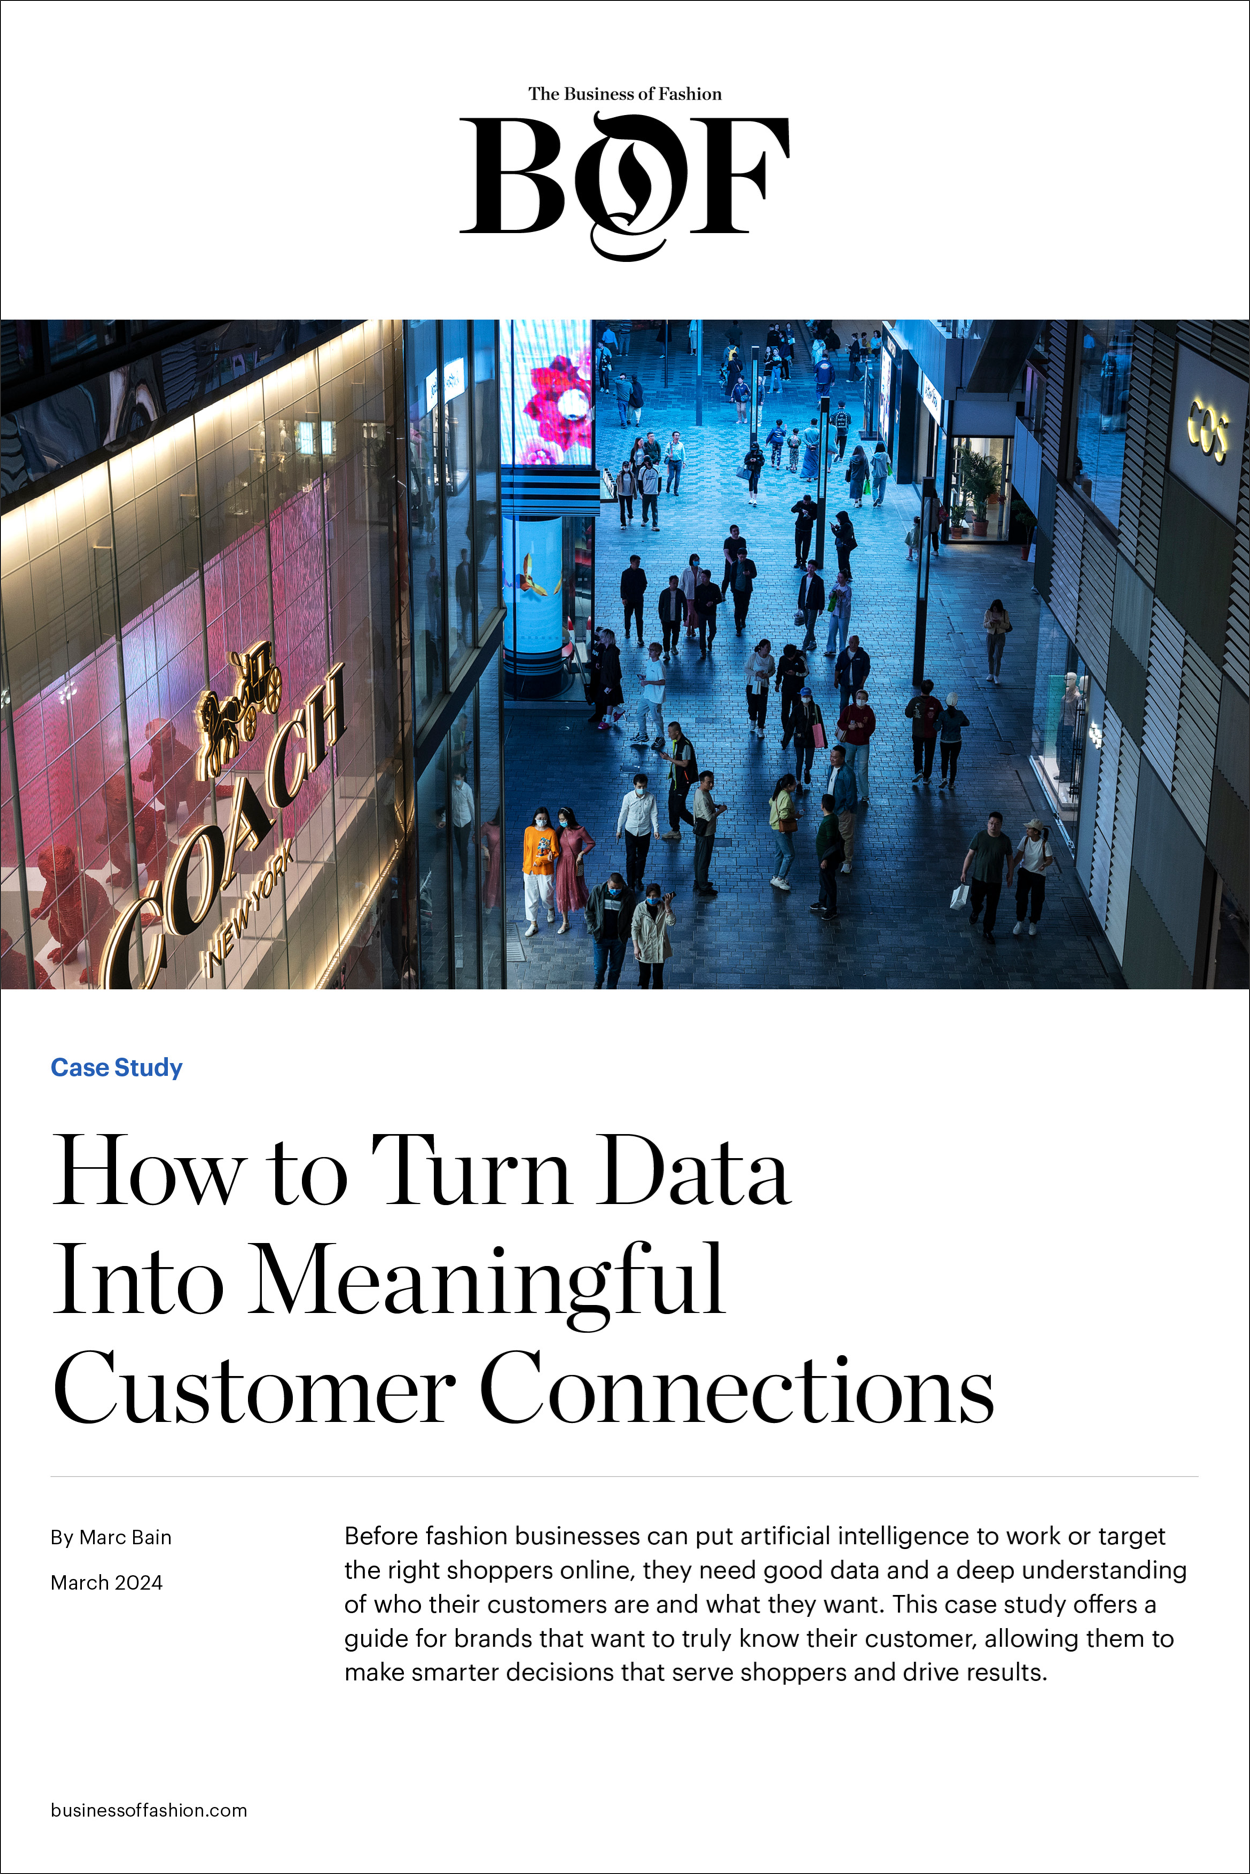 Case Study, How to Turn Data Into Meaningful Customer Connections